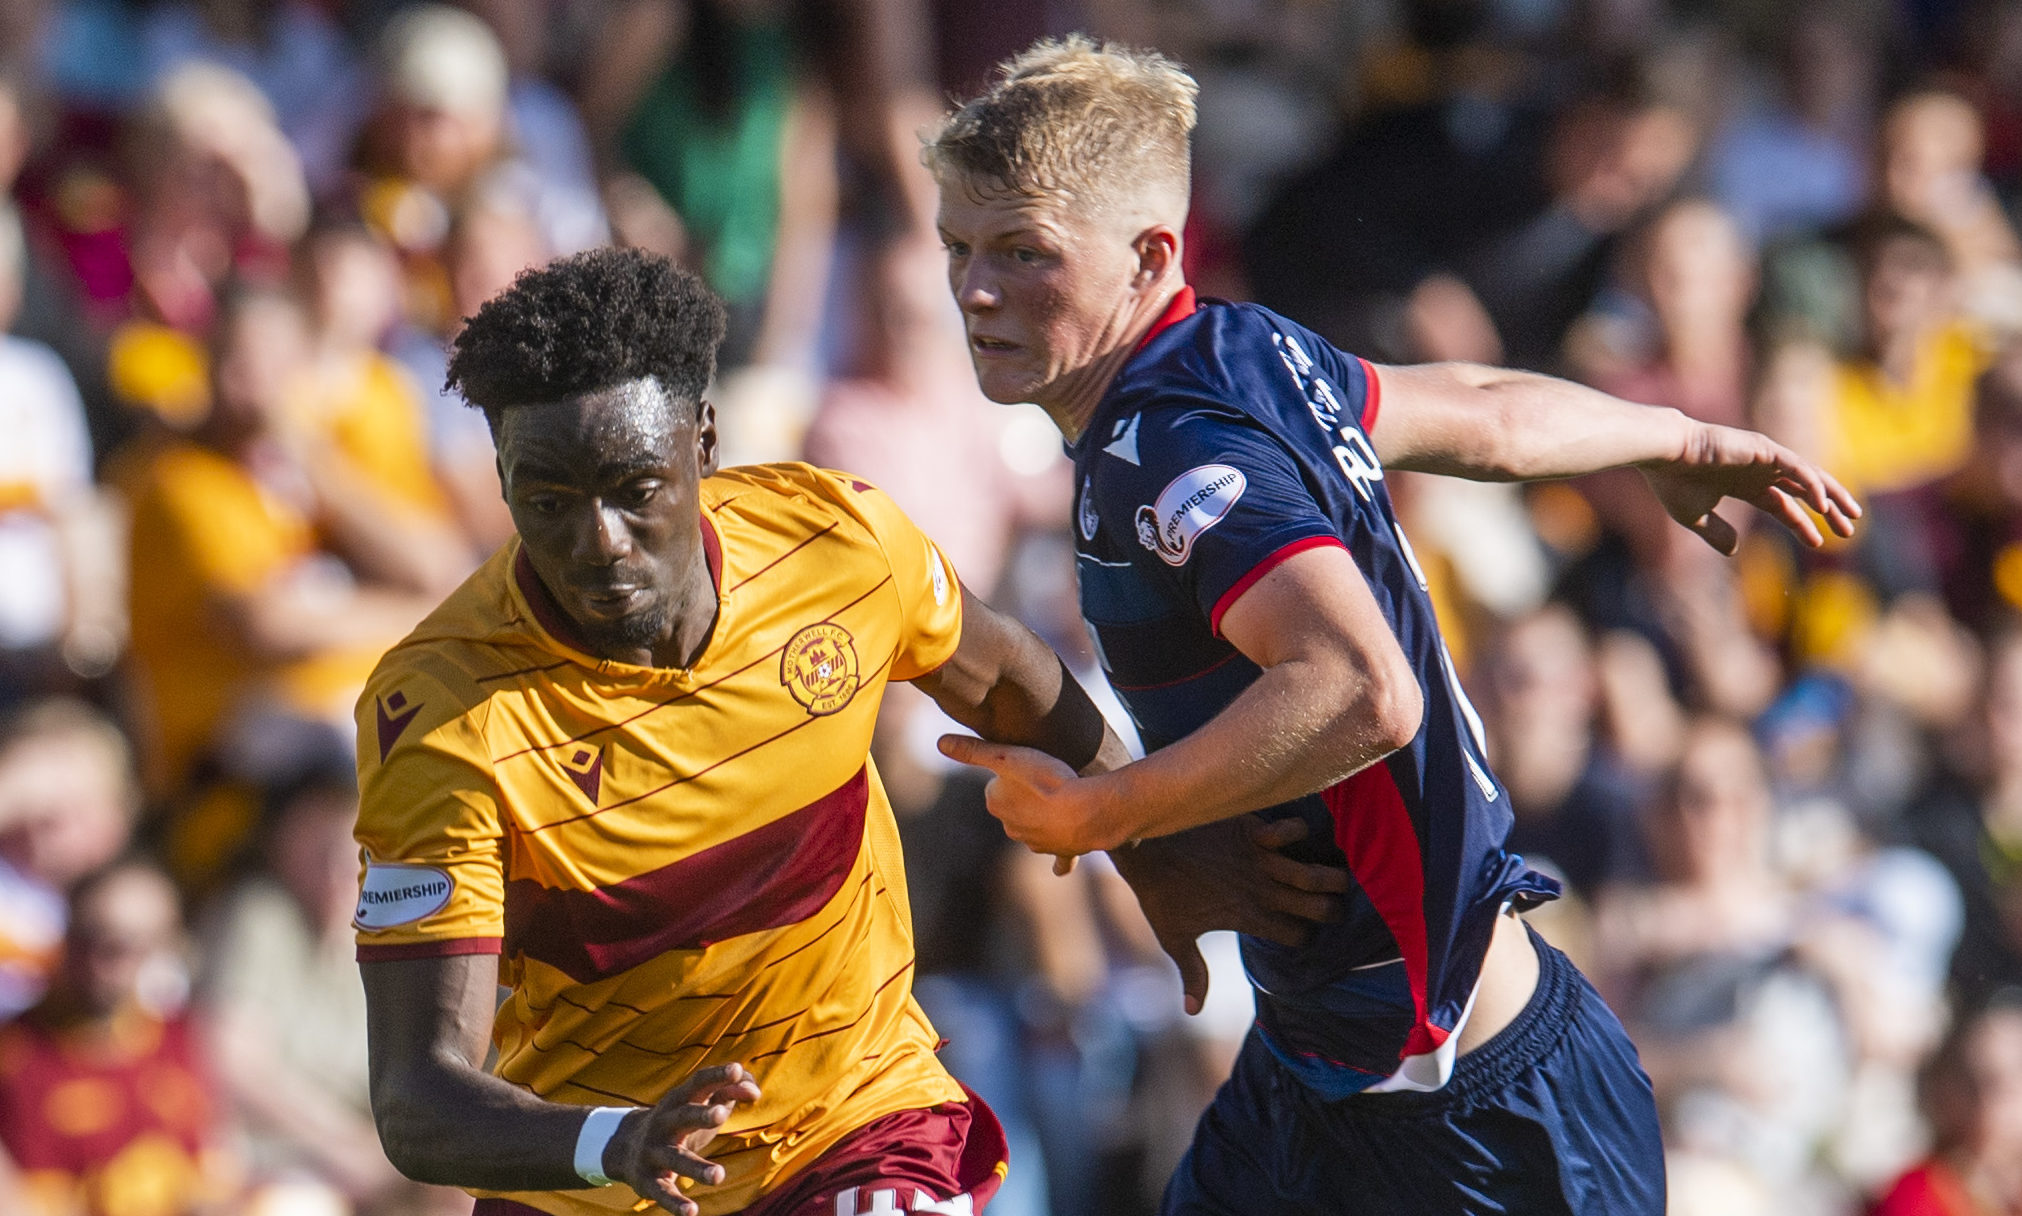 Motherwell's Devante Cole in action with Ross County's Tom Grivosti during the Ladbrokes Premiership match between Motherwell and Ross County at Fir Park.